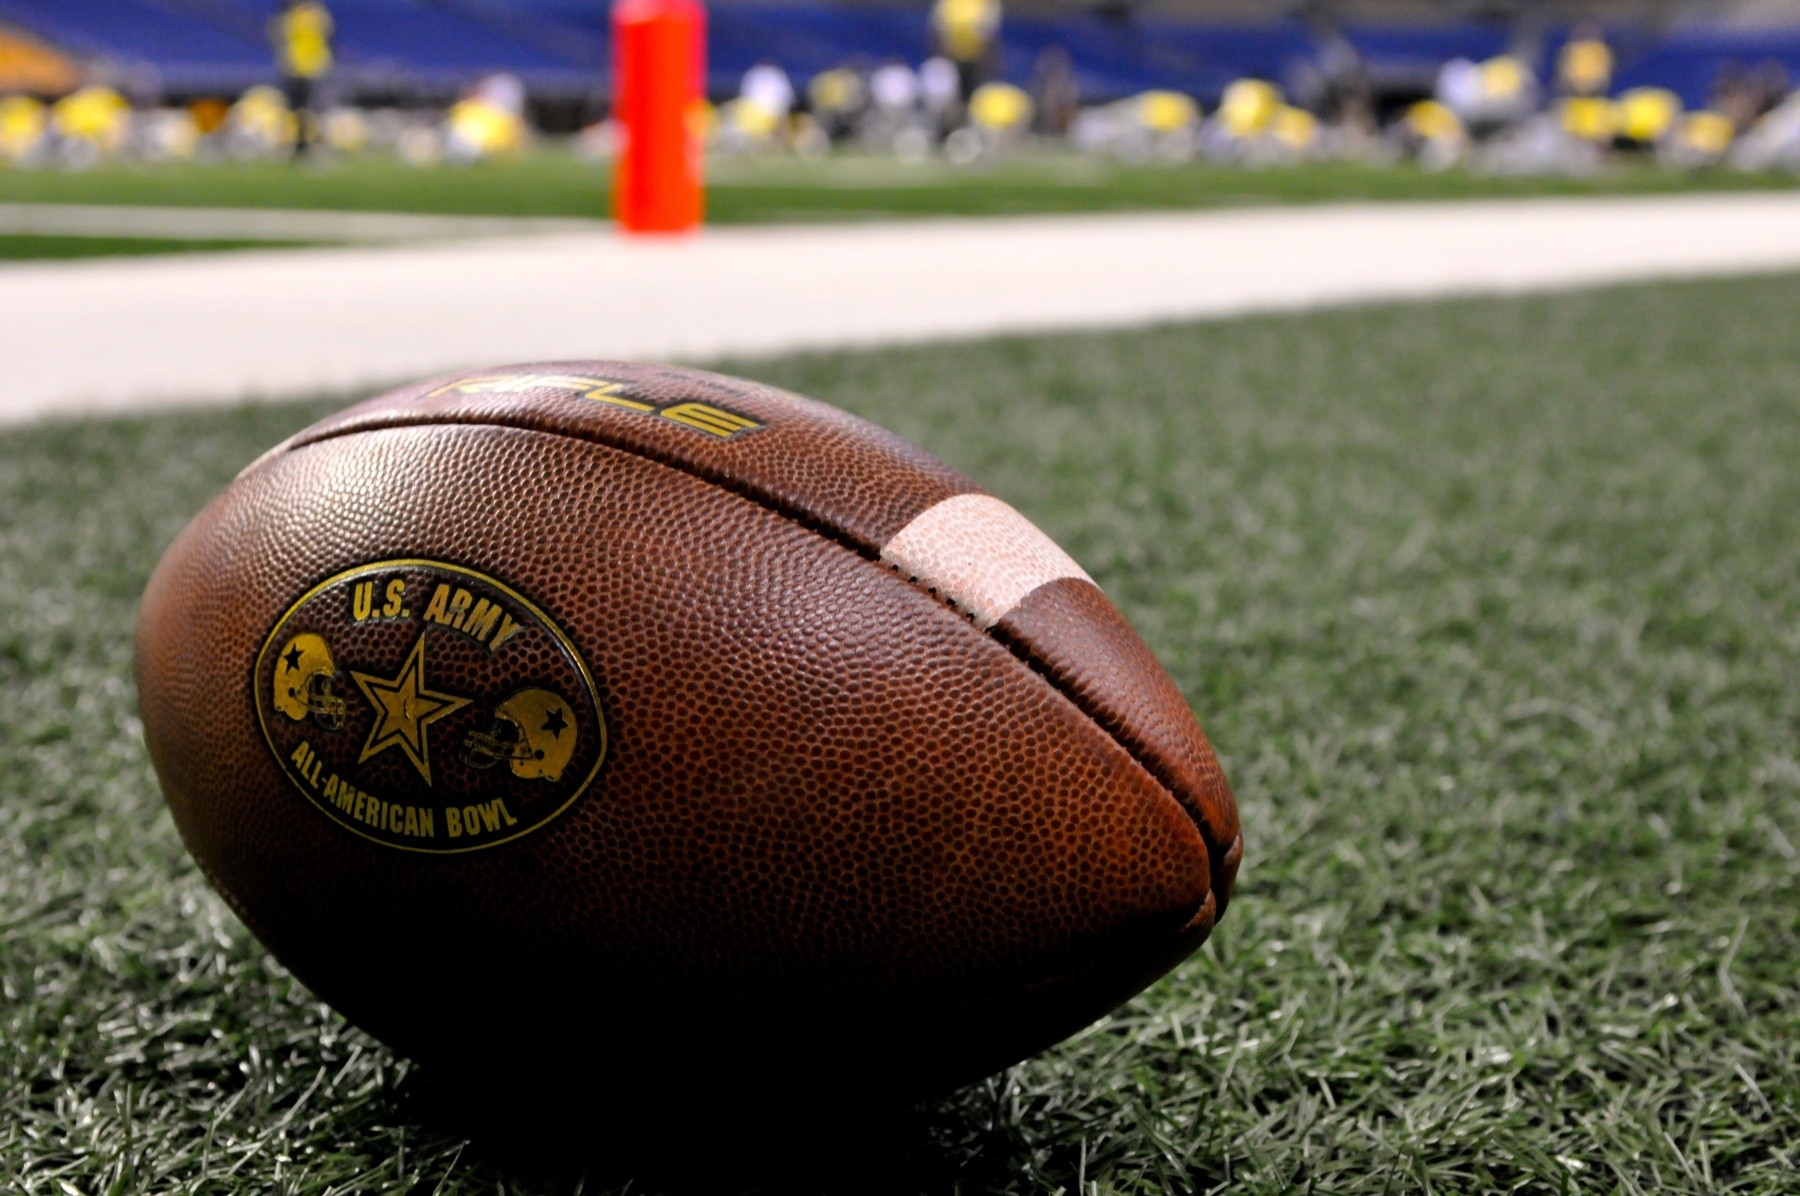 US Army holds AllAmerican Bowl in San Antonio Article The United